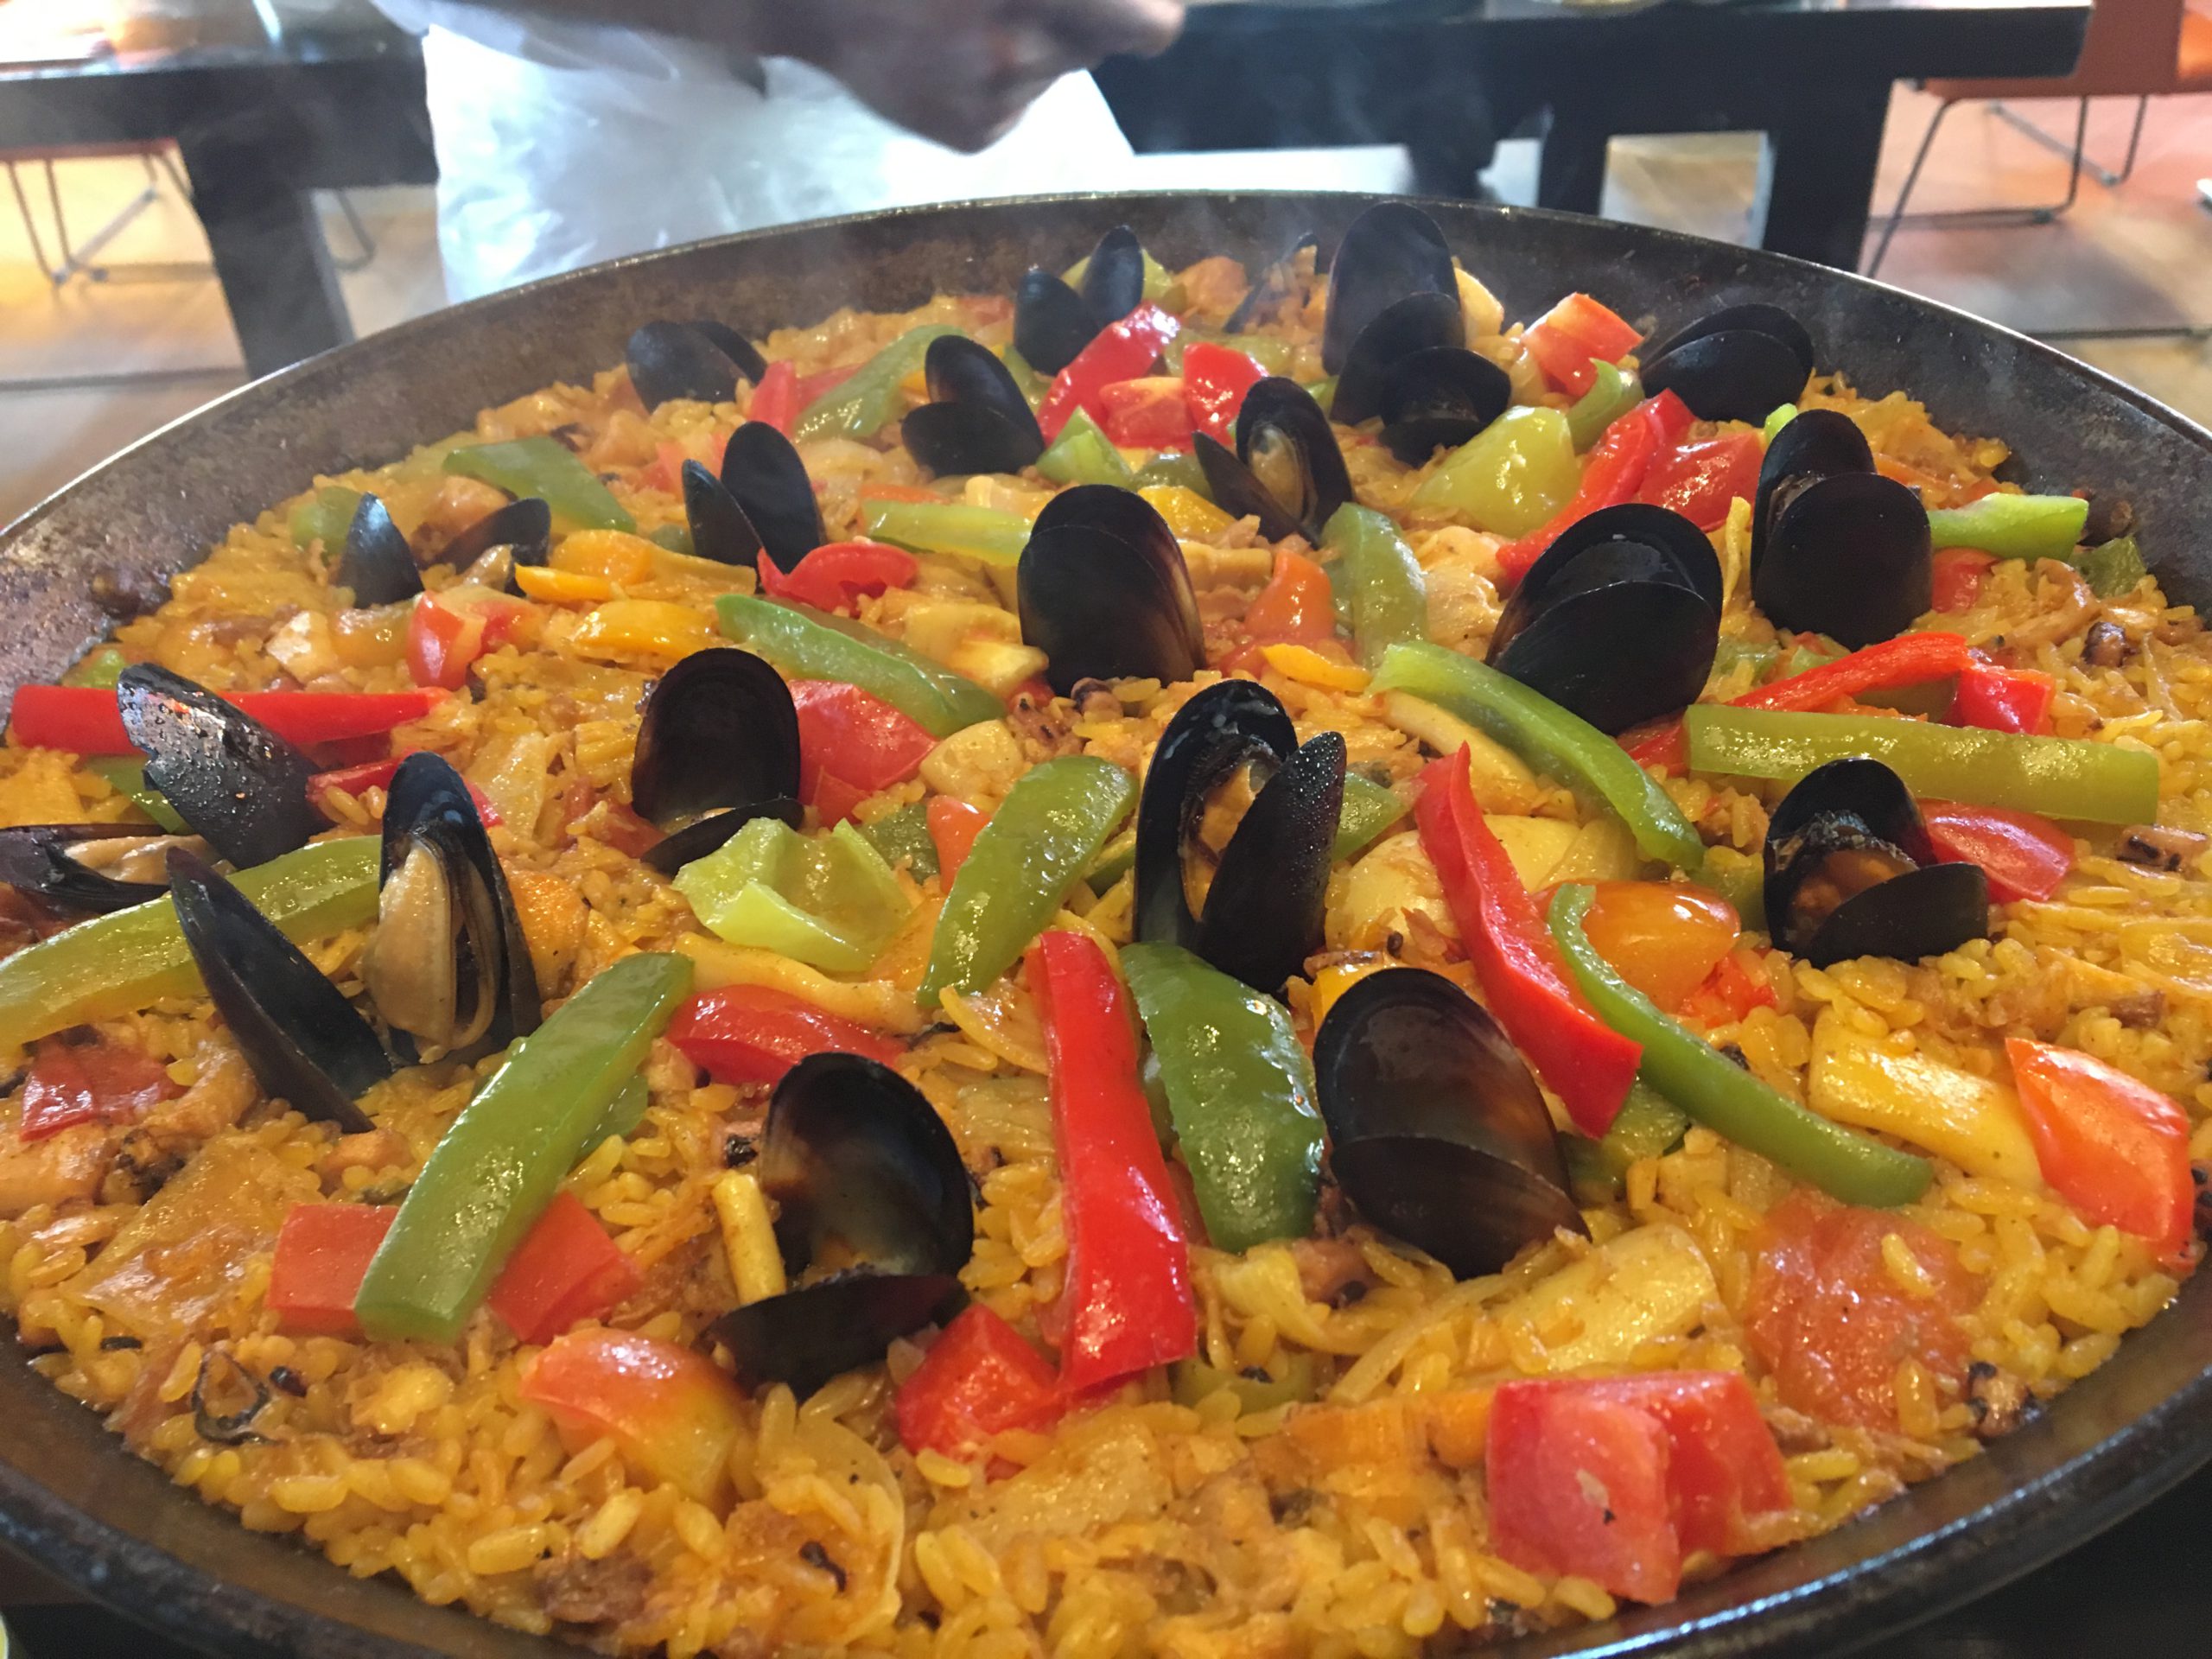 Paella for lunch